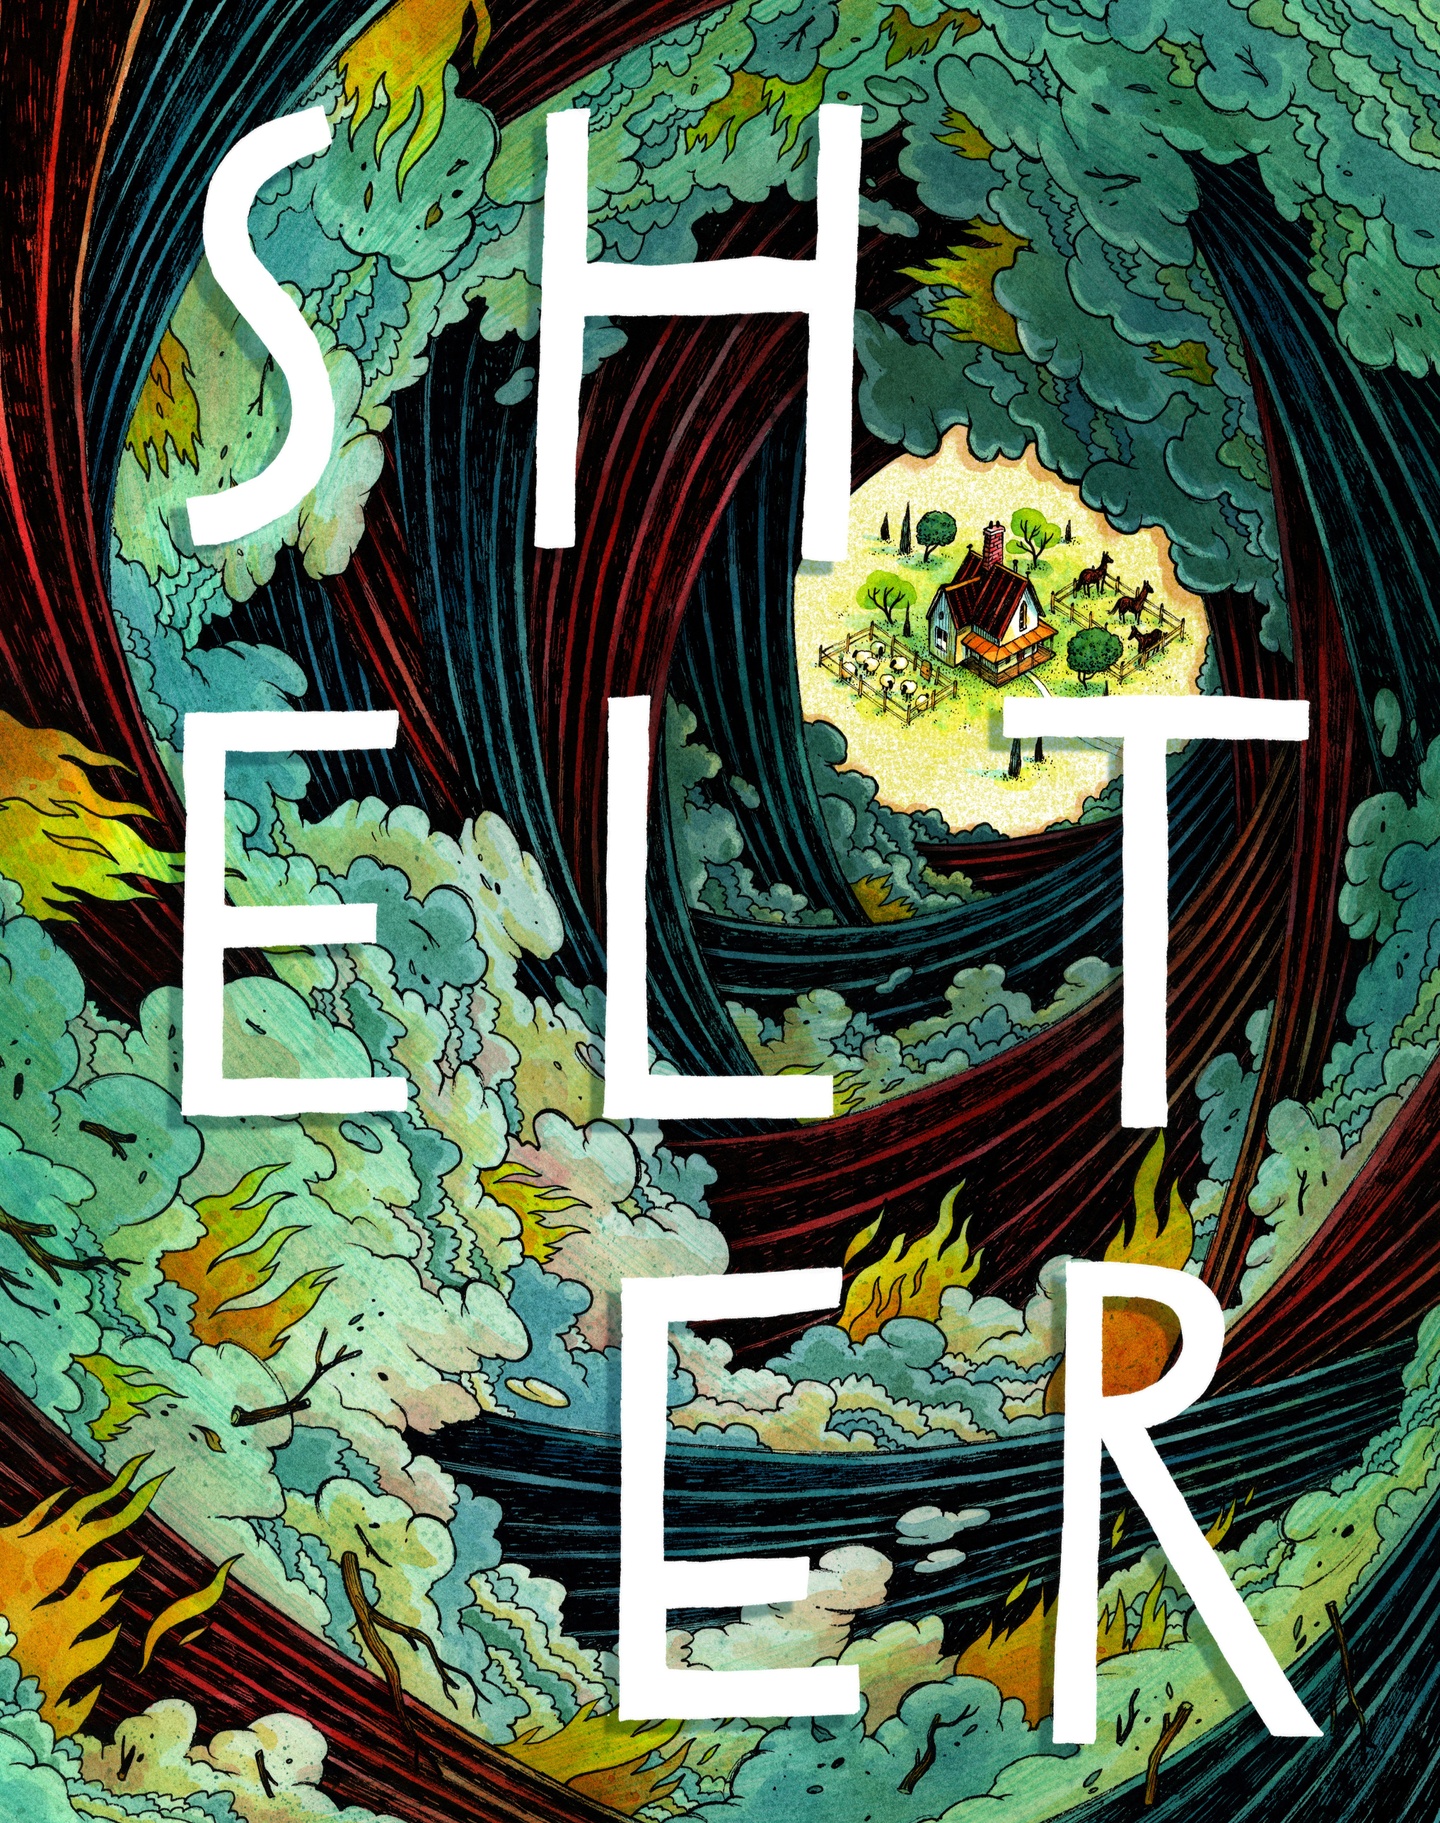 An illustration: the word "SHELTER" hand-lettered in a large font in the center of the illustration; slight shadows behind the letterforms are cast onto a dynamic composition that swirls in waves, teeming with foliage and flames, framing a small drawing of a house with two pens in the center/upper-right area.